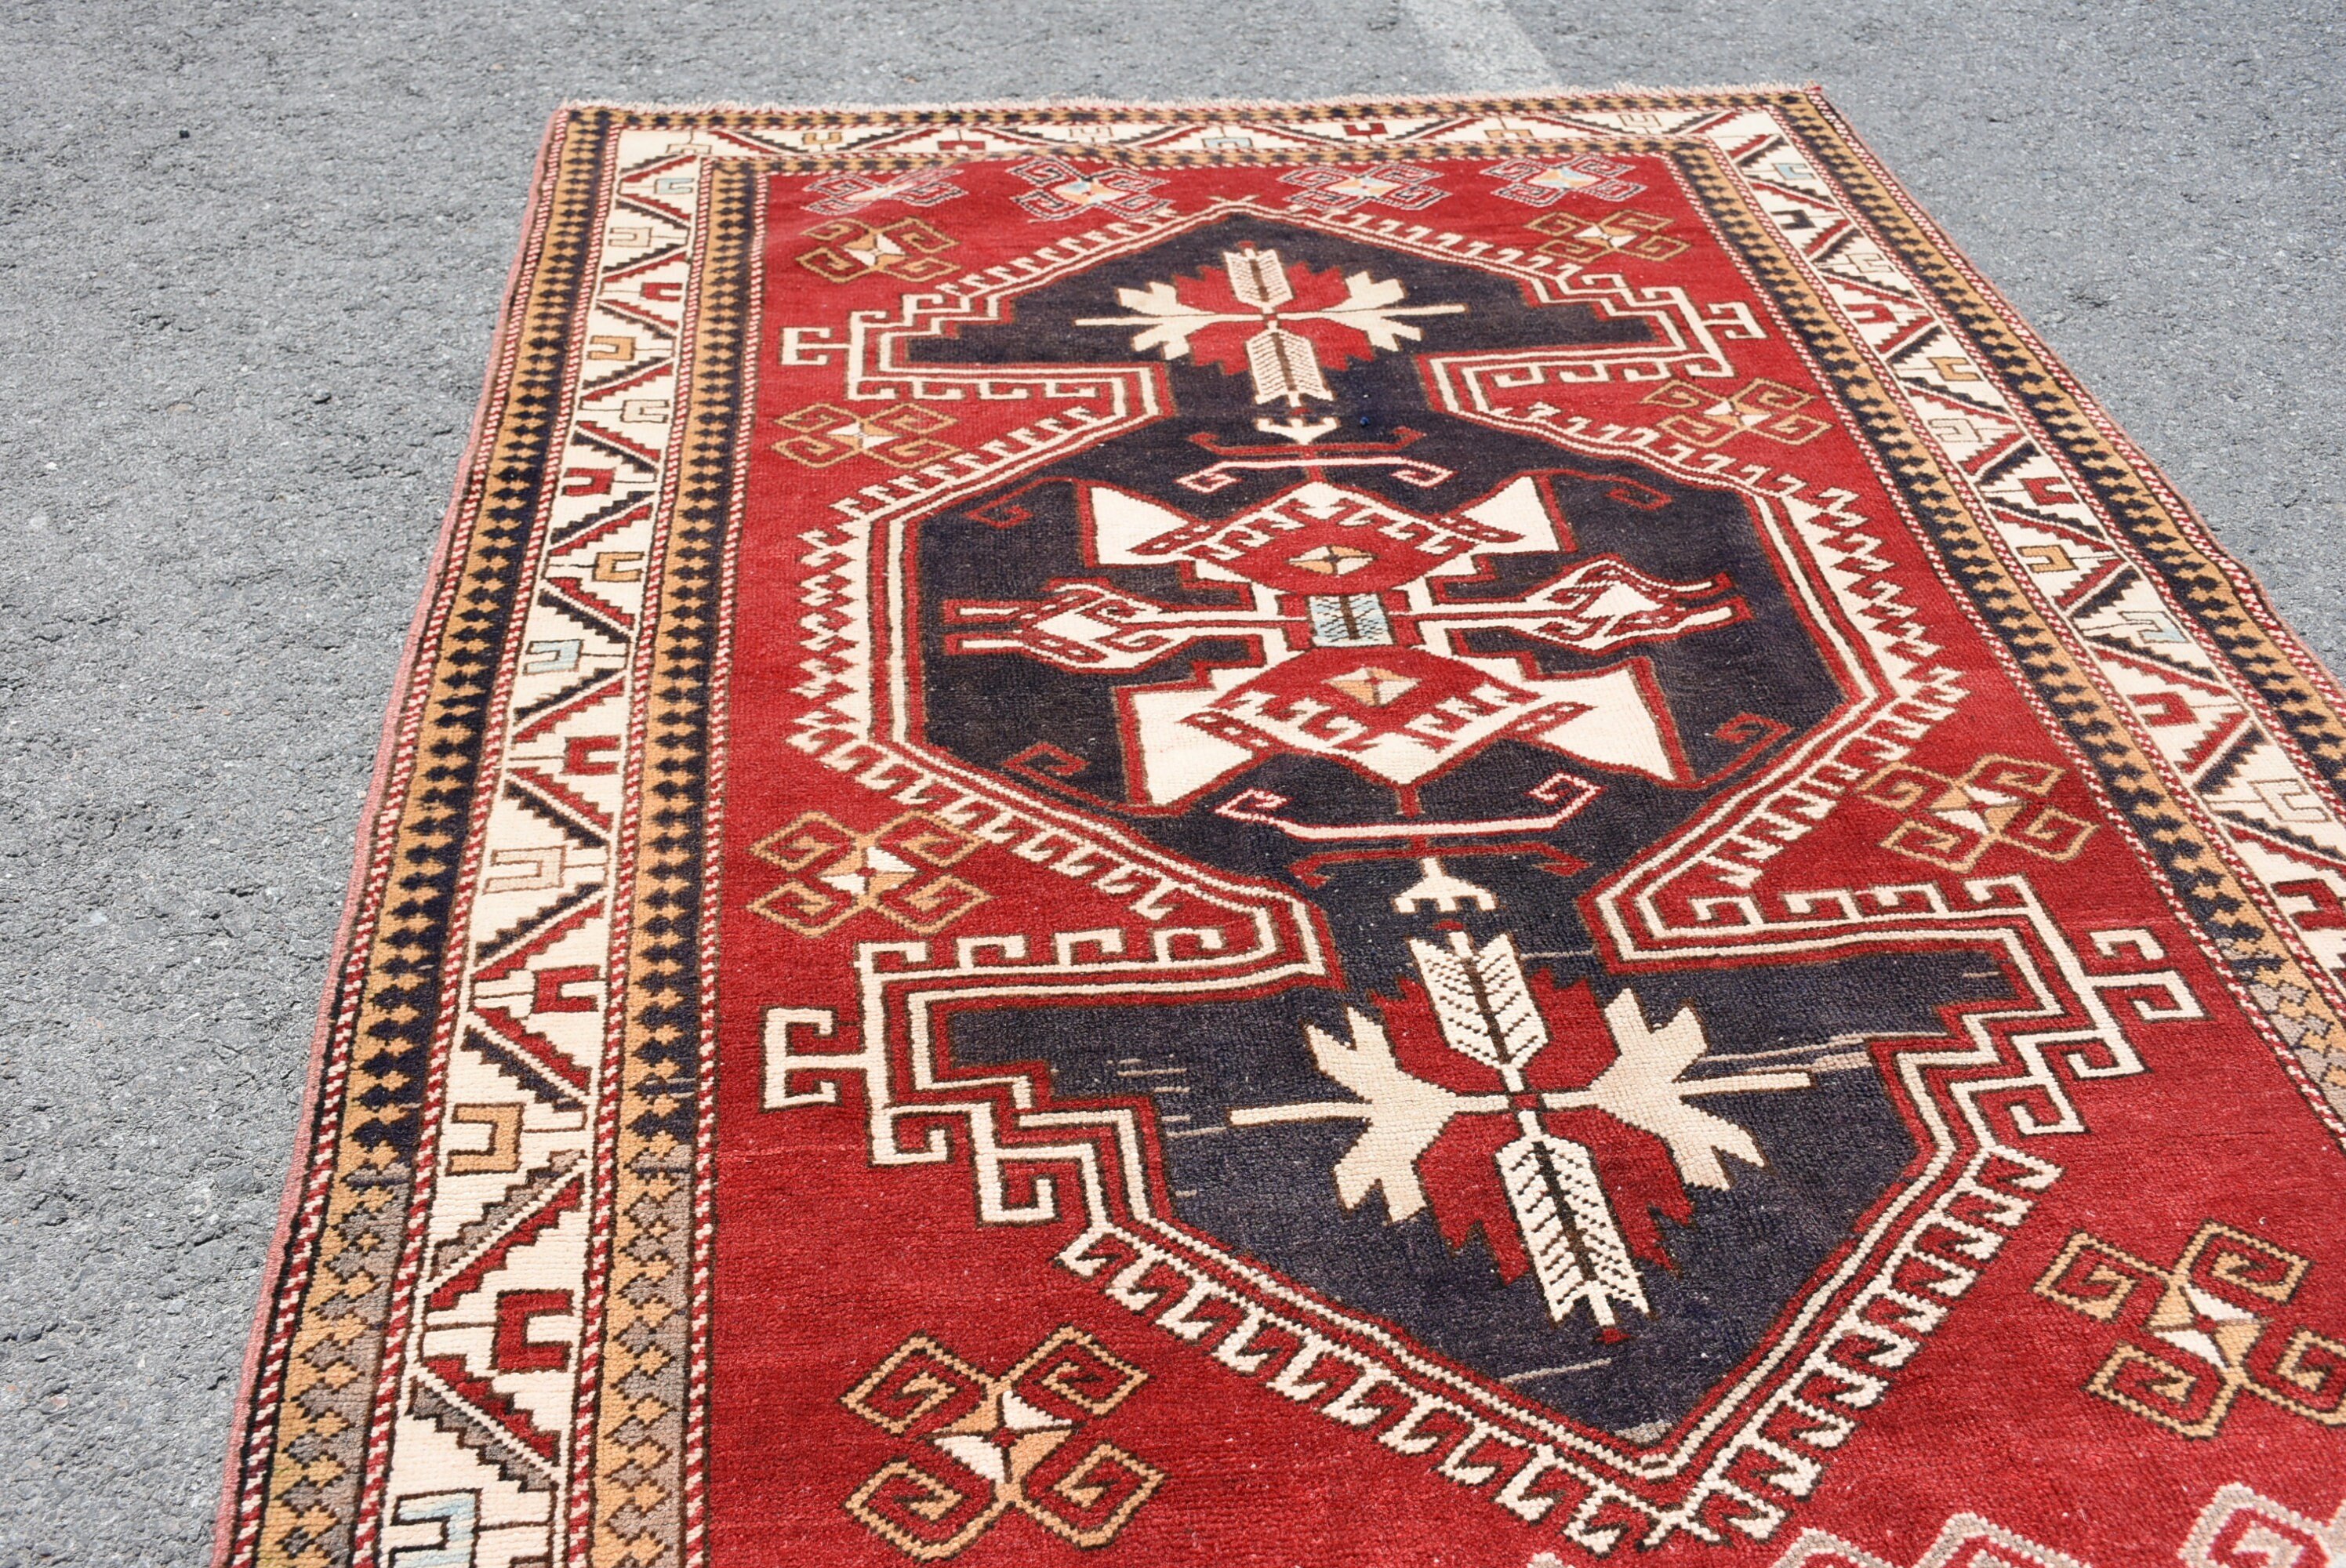 Turkish Rug, Eclectic Rugs, Vintage Rug, Moroccan Rugs, 4.4x6.6 ft Area Rug, Dining Room Rugs, Red Cool Rugs, Rugs for Bedroom, Kitchen Rug